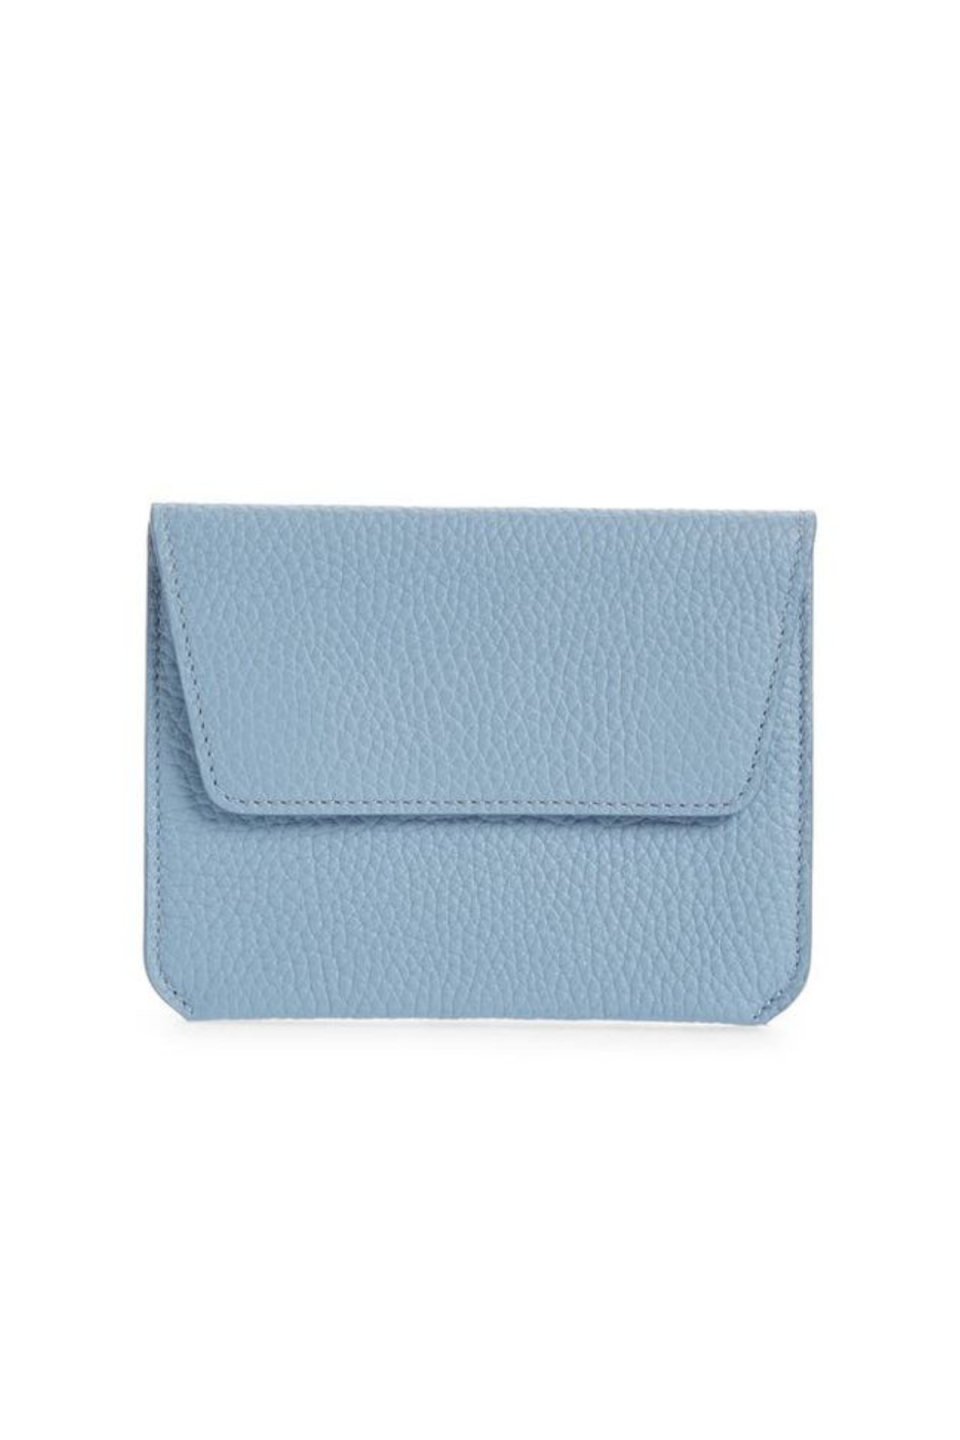 22) Mini Hasse Purse Leather Wallet